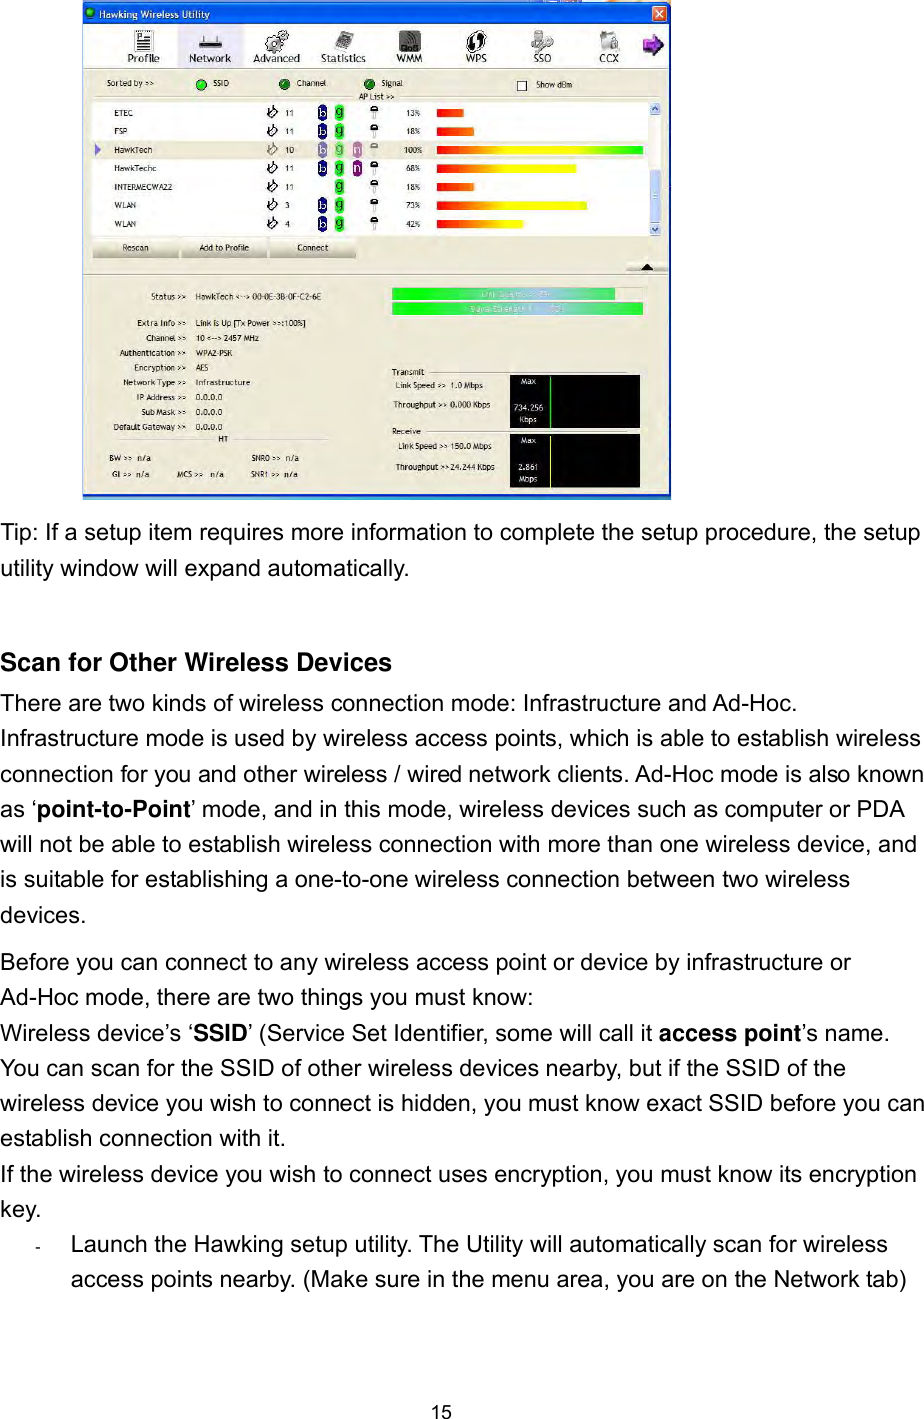  15  Tip: If a setup item requires more information to complete the setup procedure, the setup utility window will expand automatically.  Scan for Other Wireless Devices There are two kinds of wireless connection mode: Infrastructure and Ad-Hoc. Infrastructure mode is used by wireless access points, which is able to establish wireless connection for you and other wireless / wired network clients. Ad-Hoc mode is also known as ‘point-to-Point’ mode, and in this mode, wireless devices such as computer or PDA will not be able to establish wireless connection with more than one wireless device, and is suitable for establishing a one-to-one wireless connection between two wireless devices. Before you can connect to any wireless access point or device by infrastructure or Ad-Hoc mode, there are two things you must know: Wireless device’s ‘SSID’ (Service Set Identifier, some will call it access point’s name.   You can scan for the SSID of other wireless devices nearby, but if the SSID of the wireless device you wish to connect is hidden, you must know exact SSID before you can establish connection with it. If the wireless device you wish to connect uses encryption, you must know its encryption key.  -      Launch the Hawking setup utility. The Utility will automatically scan for wireless access points nearby. (Make sure in the menu area, you are on the Network tab)  